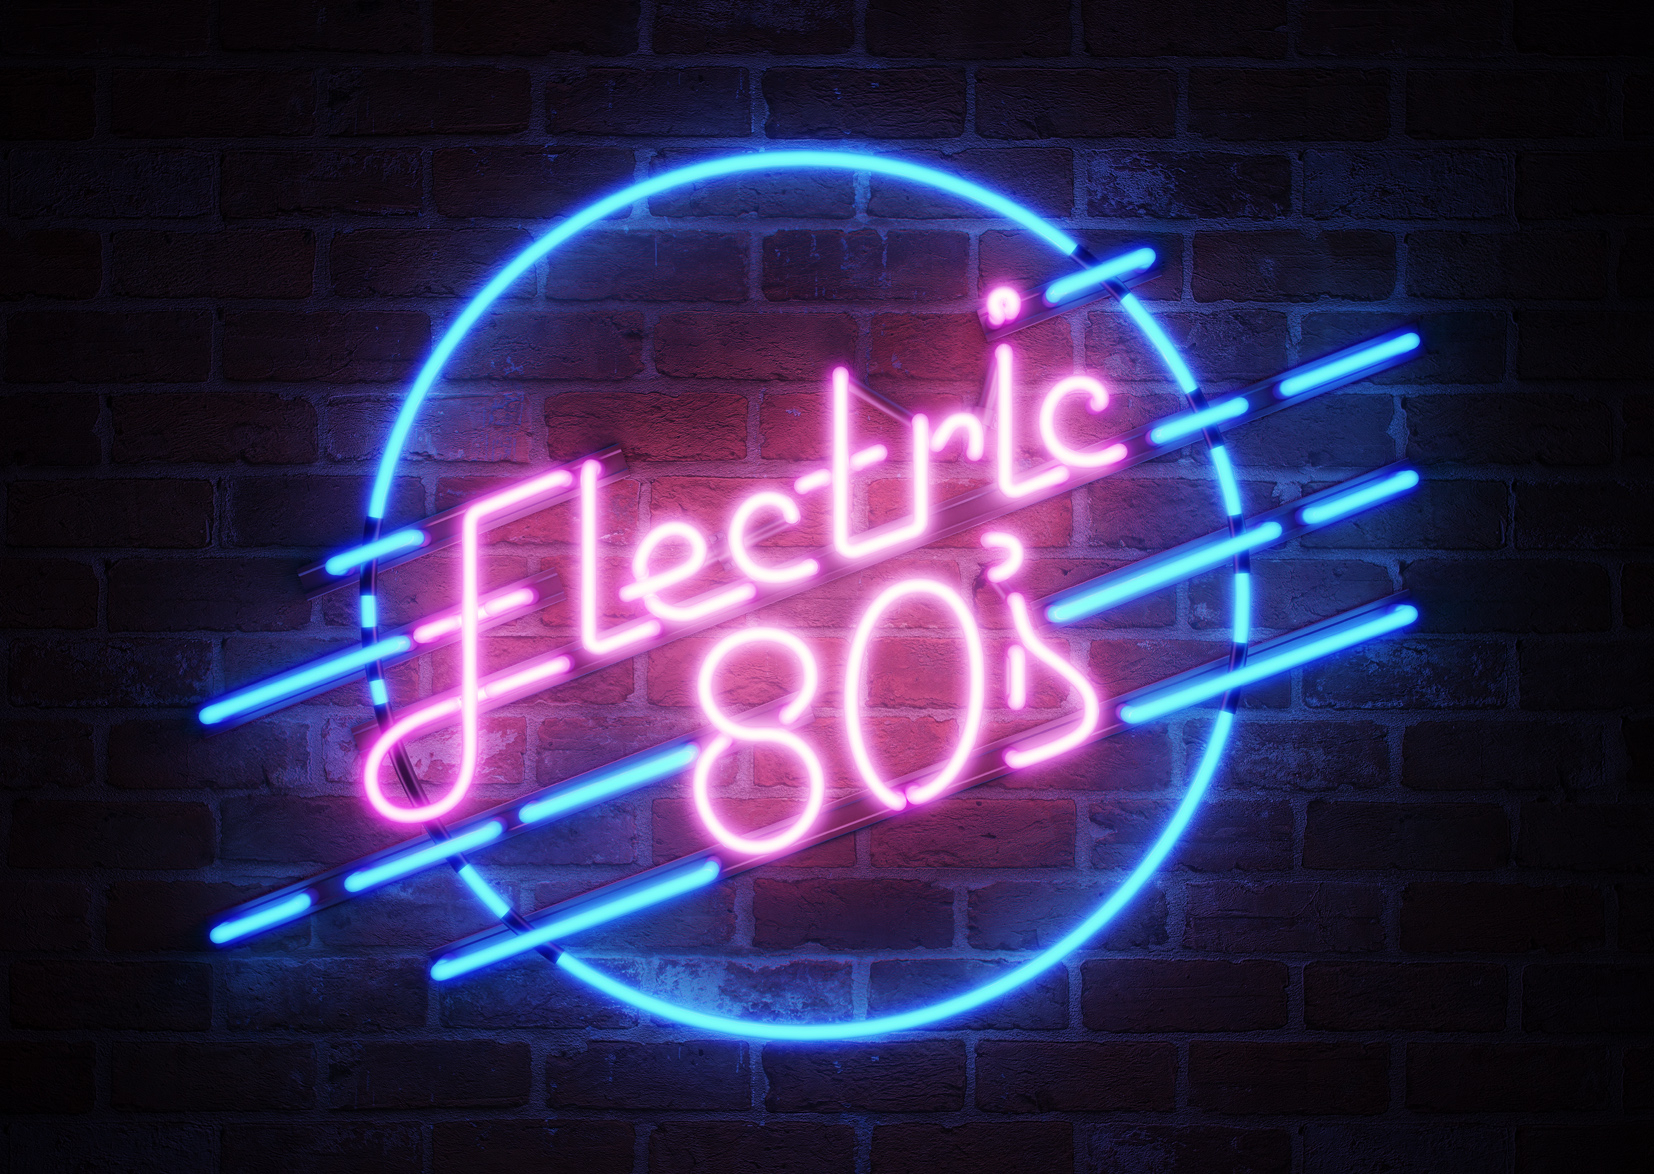 Electric 80's